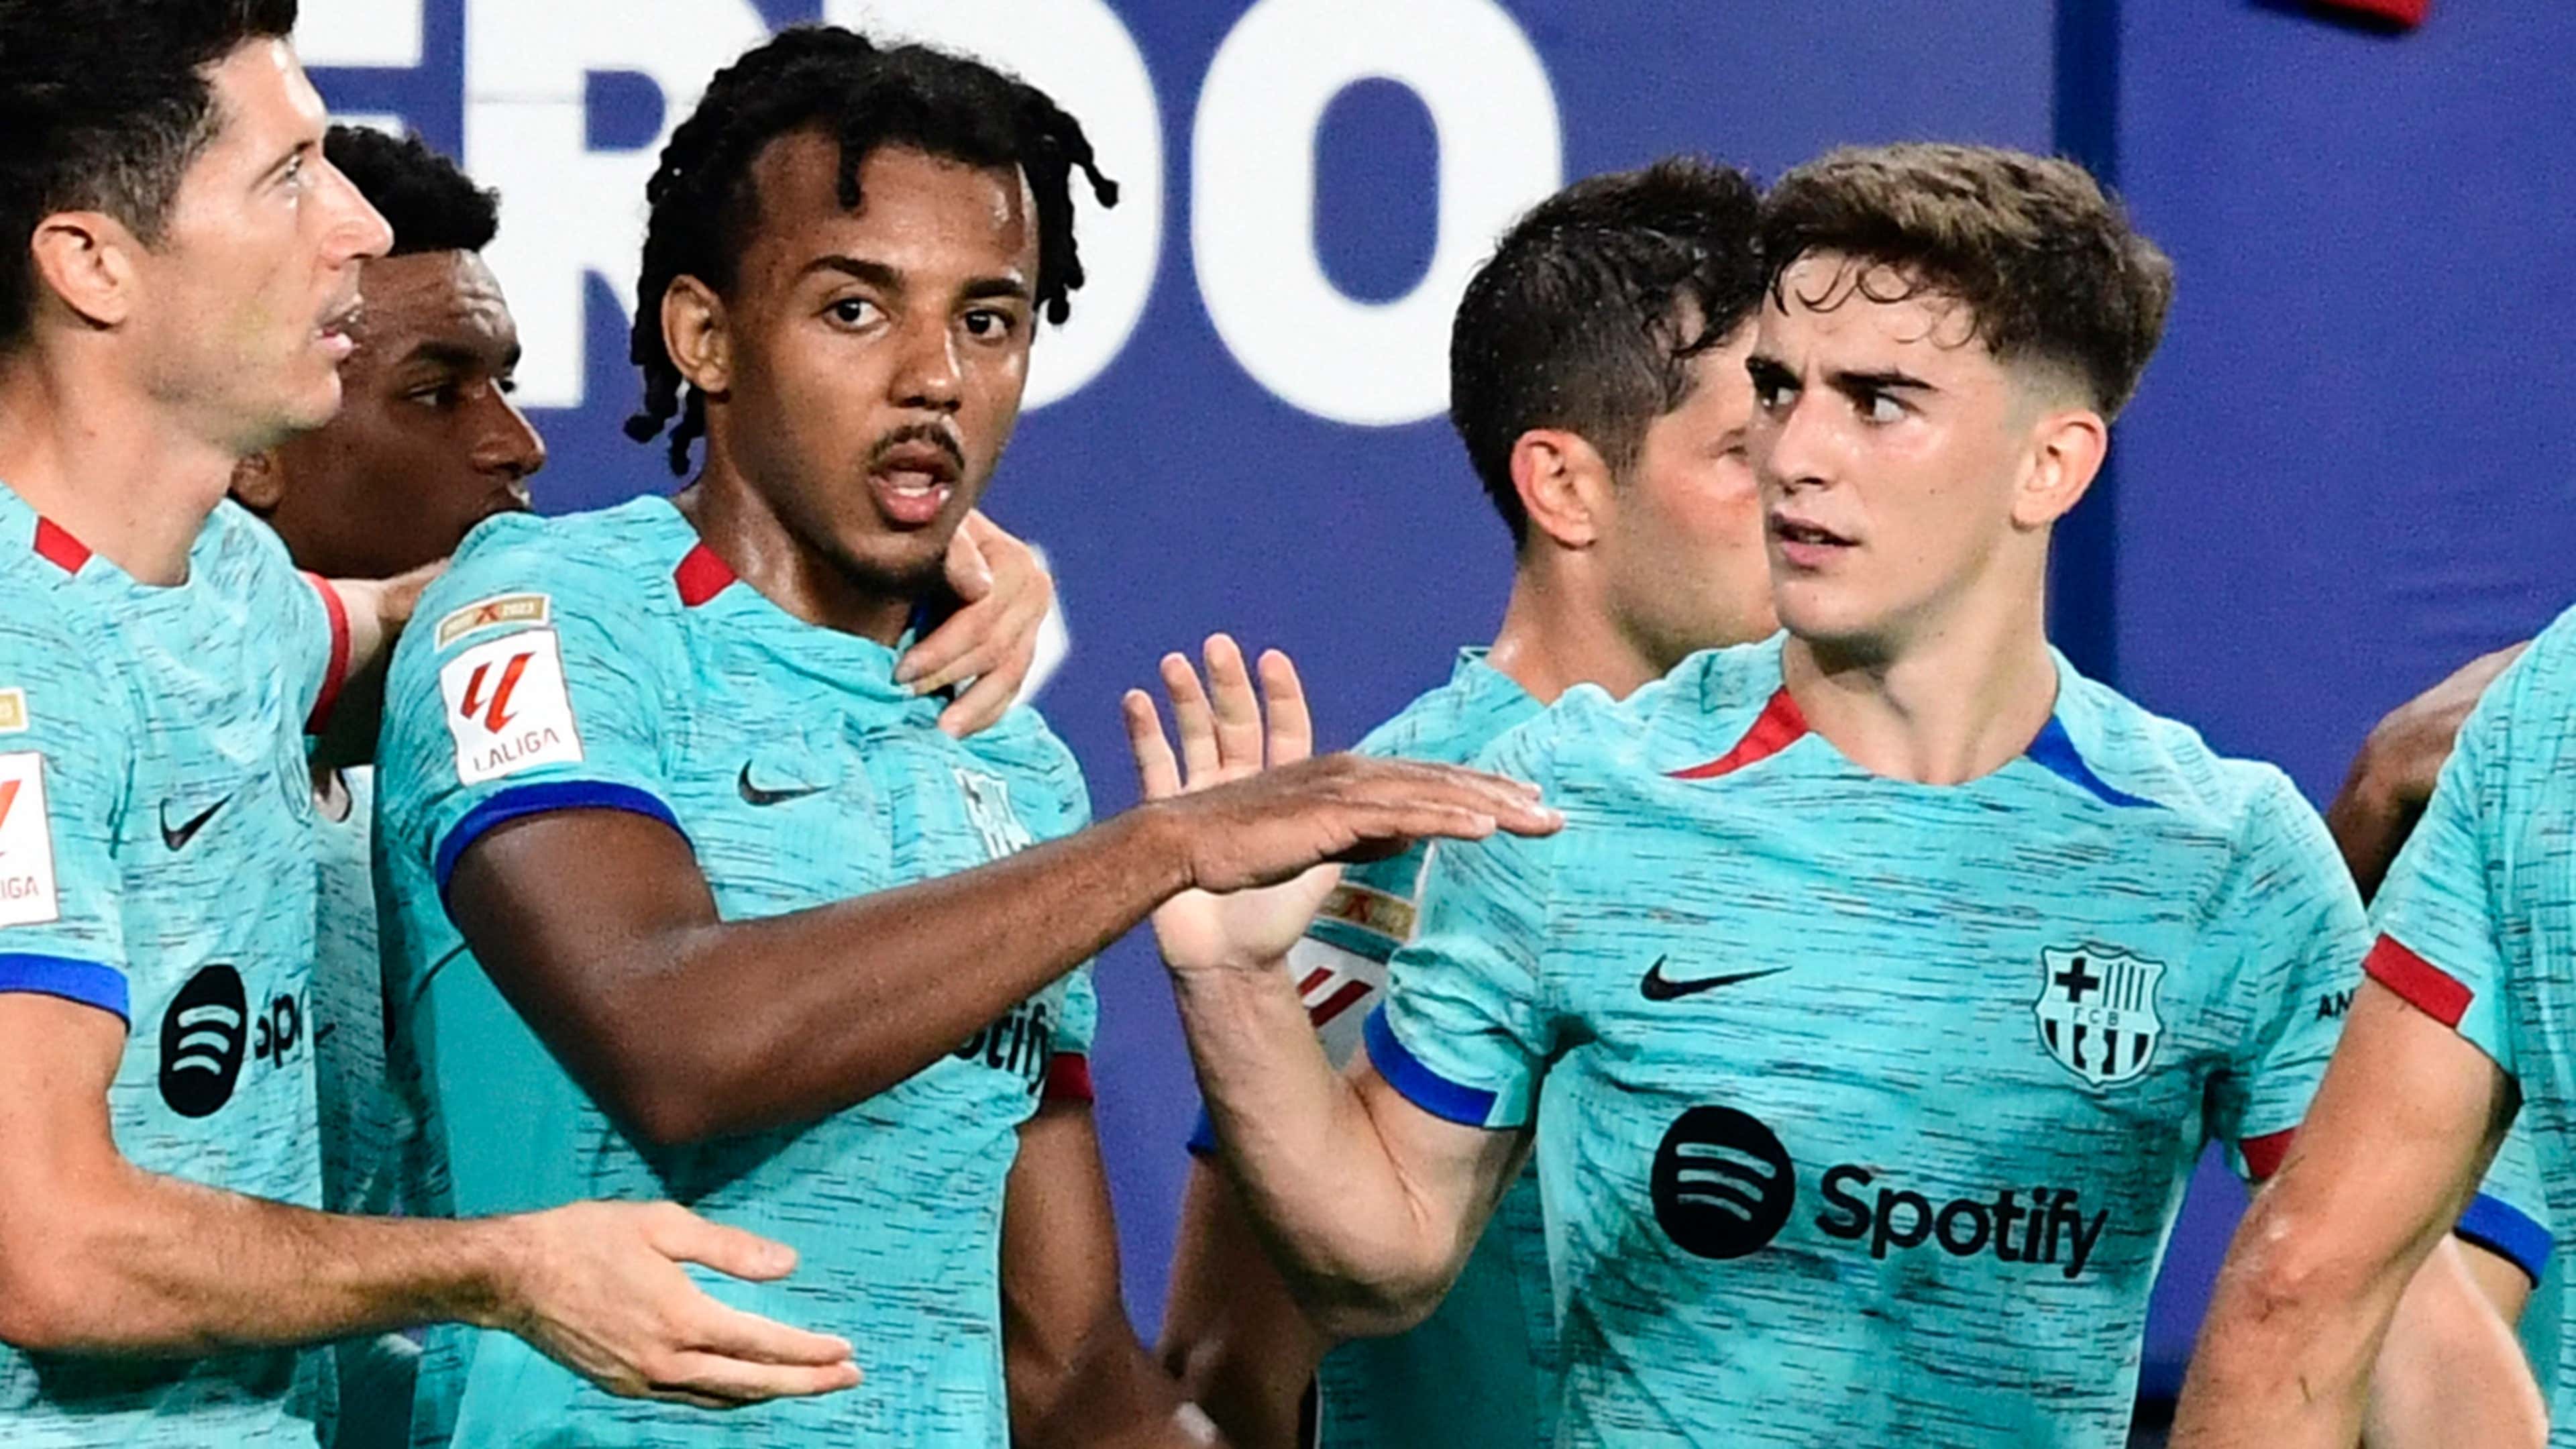 Frenkie de Jong of FC Barcelona celebrates 2-2 with Jules Kounde of News  Photo - Getty Images